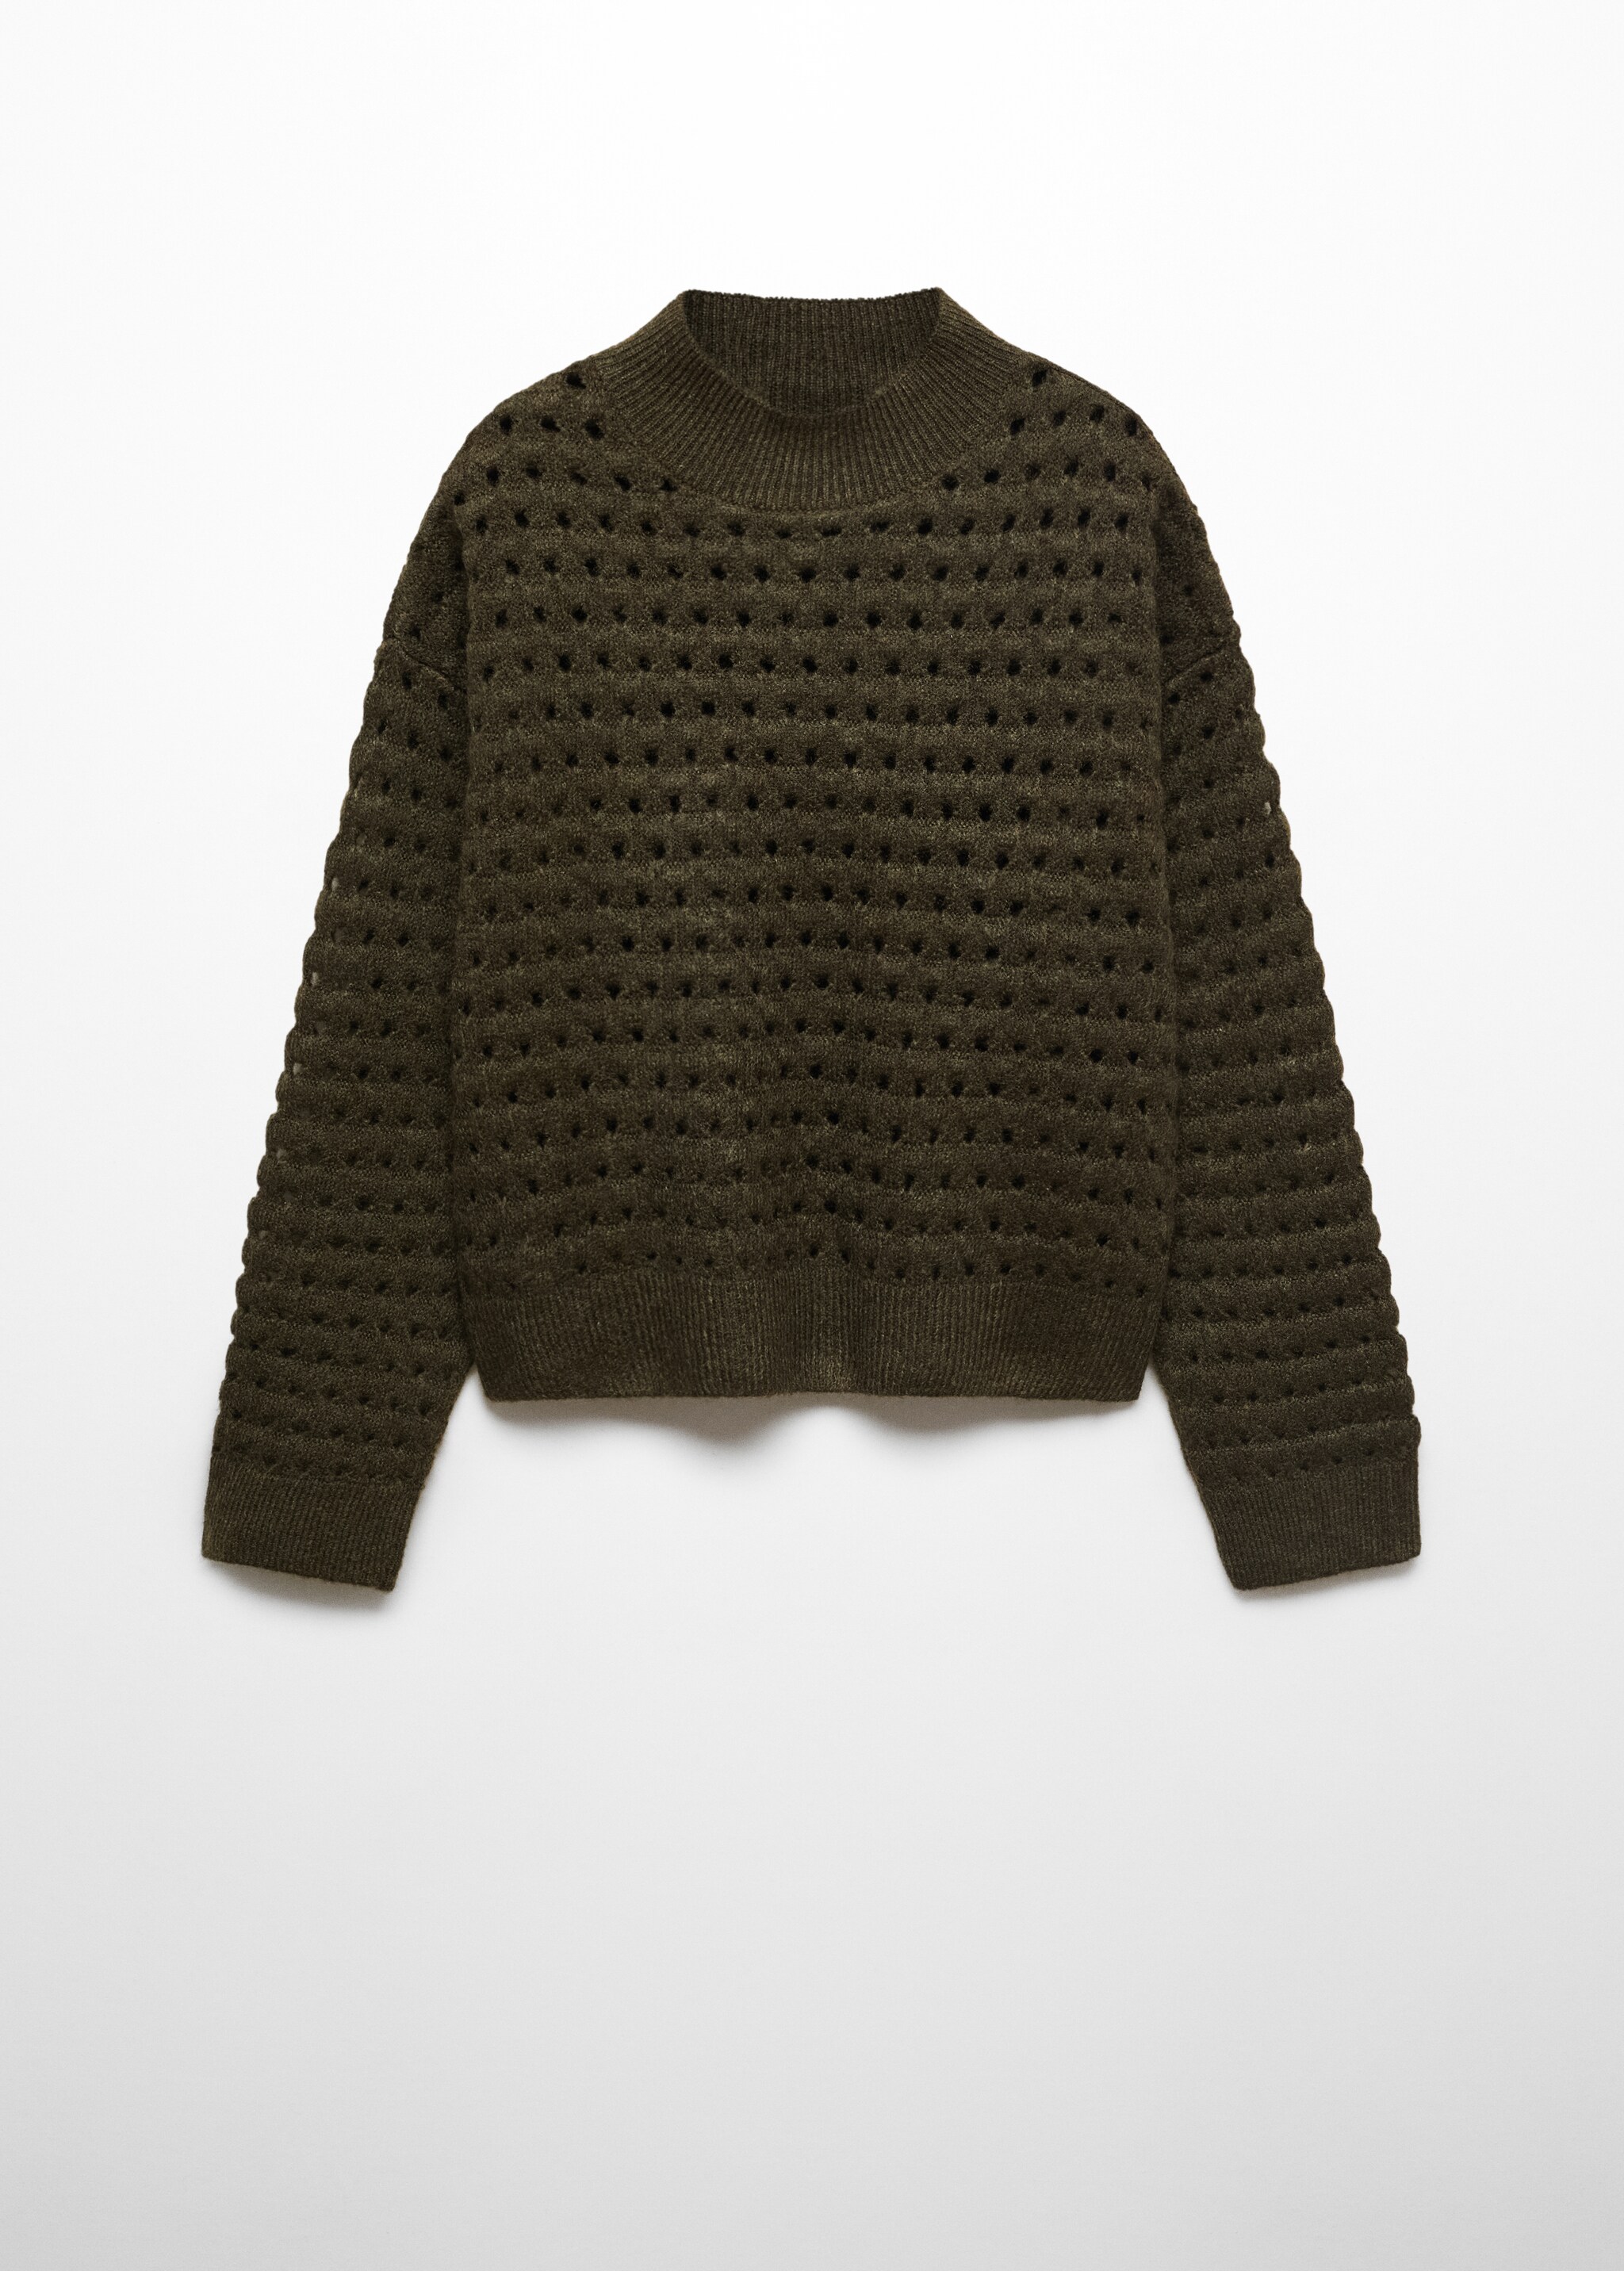 Knitted jumper with openwork details - Article without model